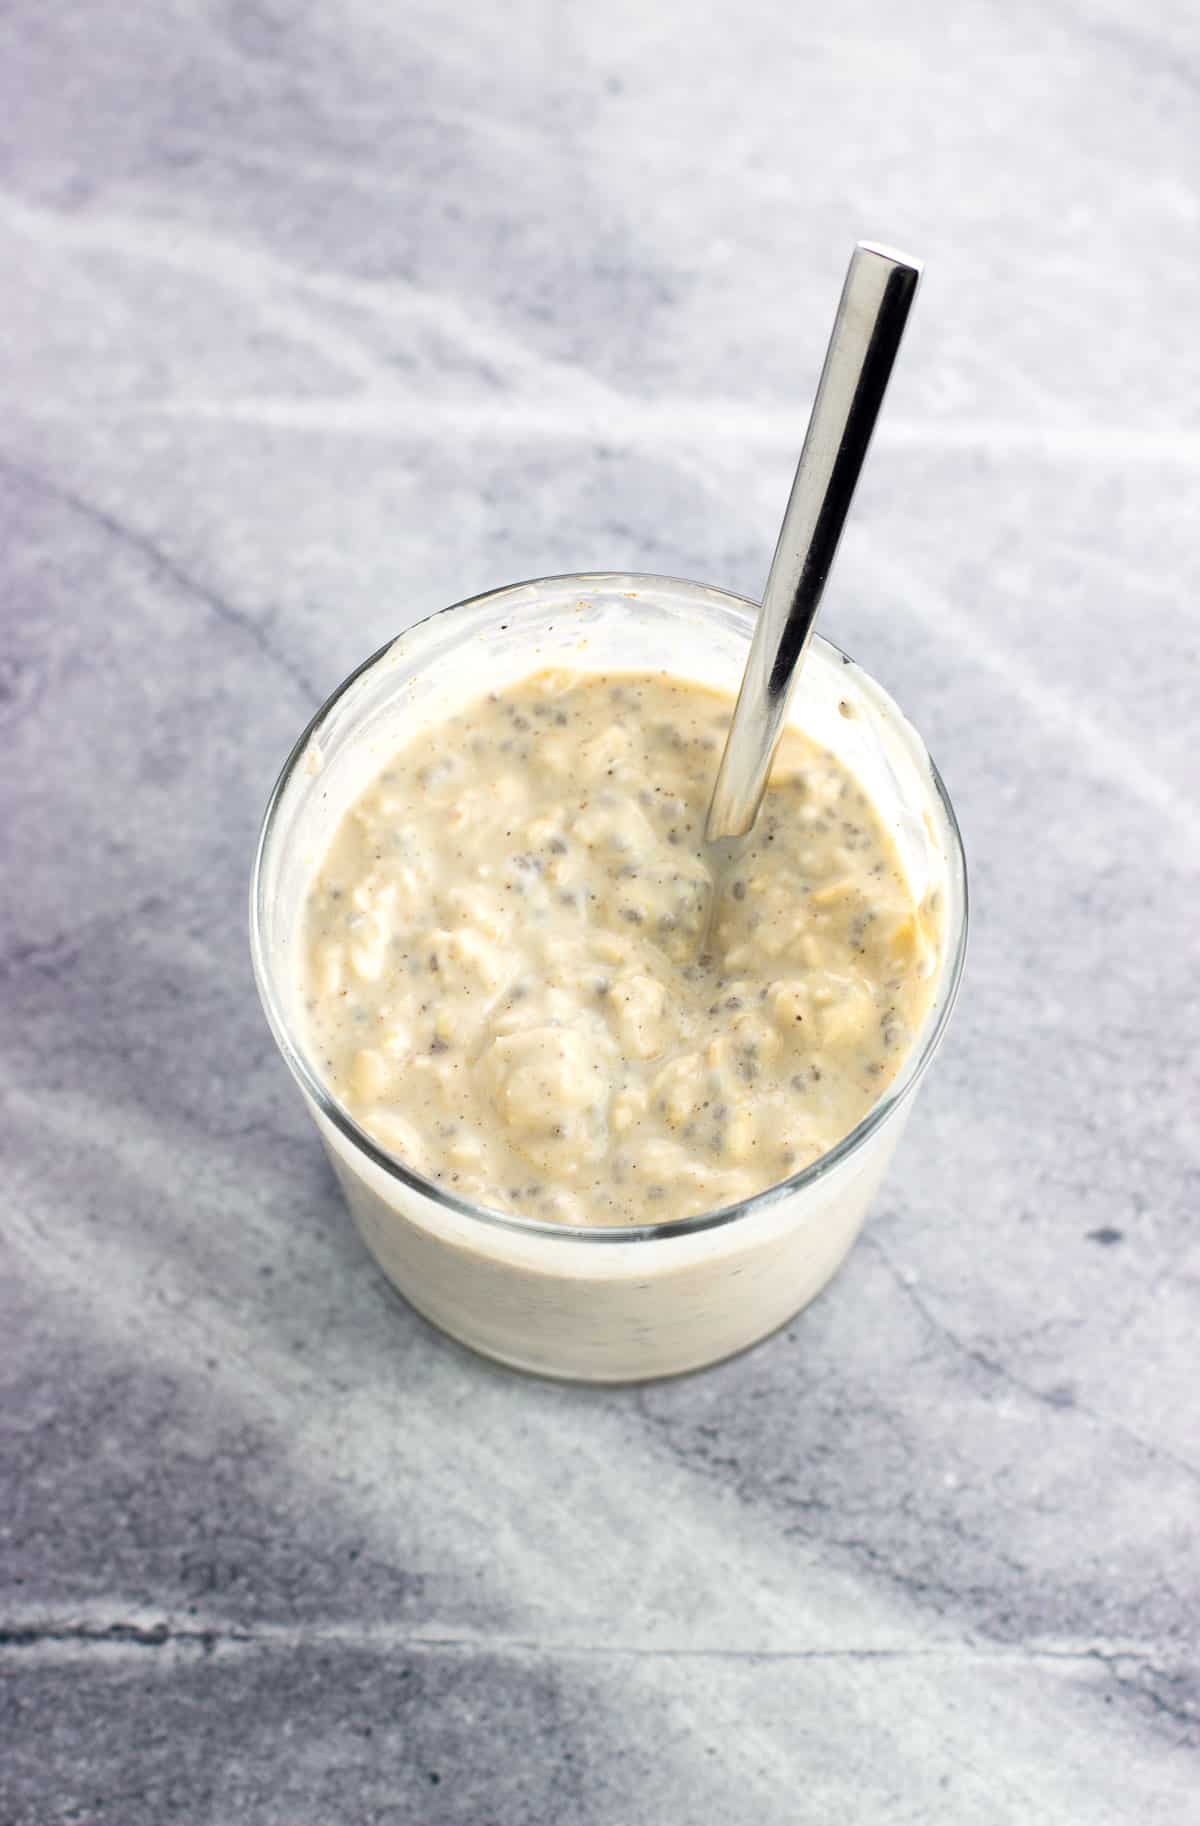 Thick and creamy overnight oats in a glass after being in the fridge overnight.